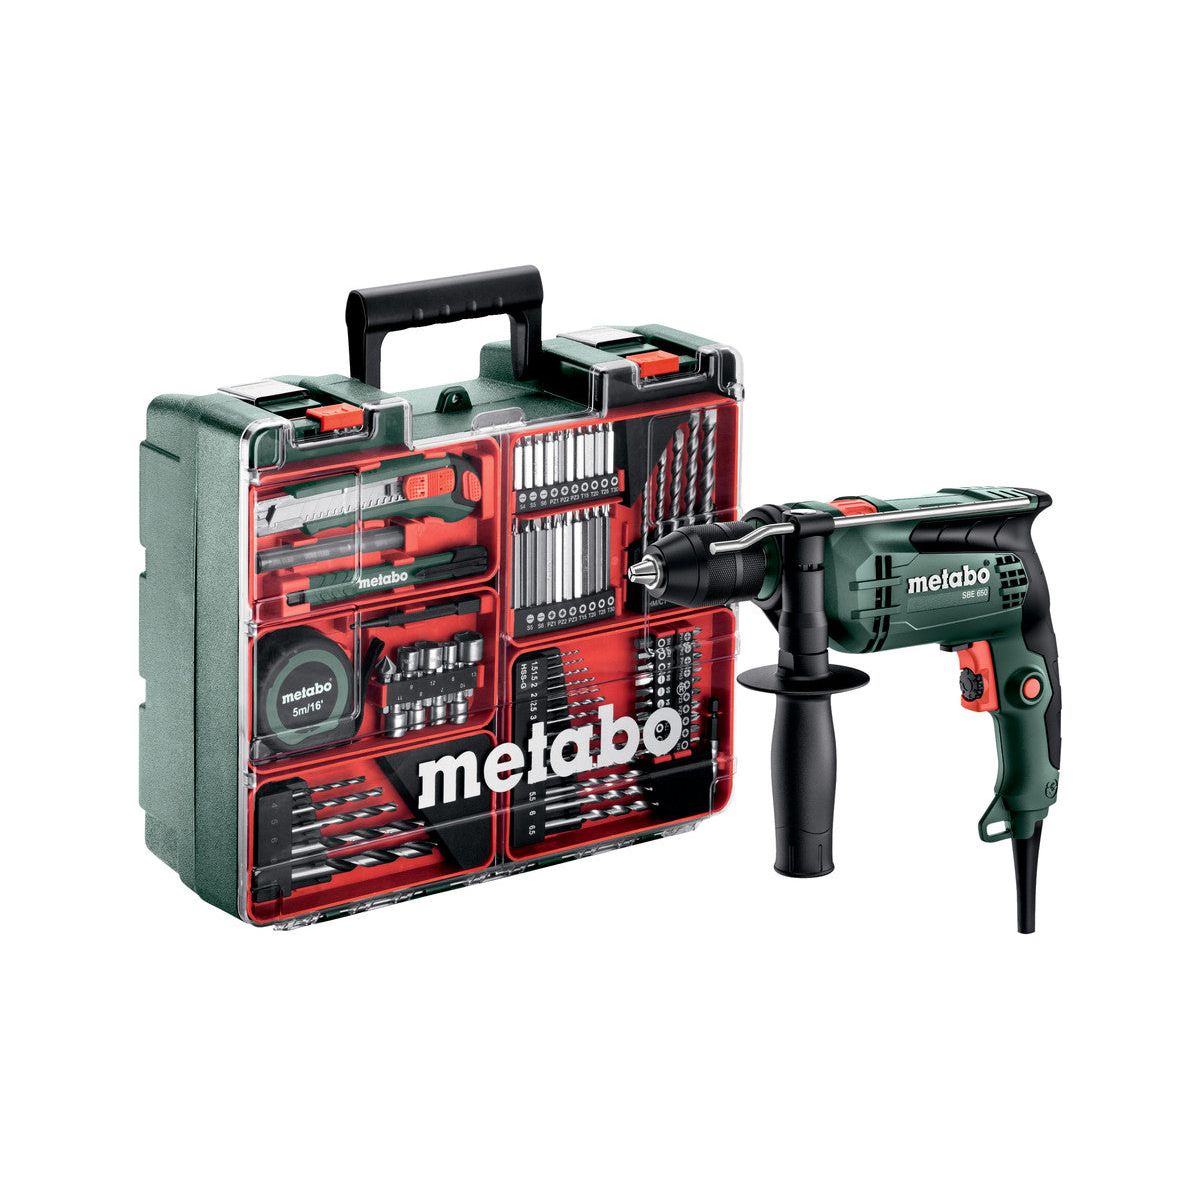 SBE 650 Set Perceuse à percussion Metabo